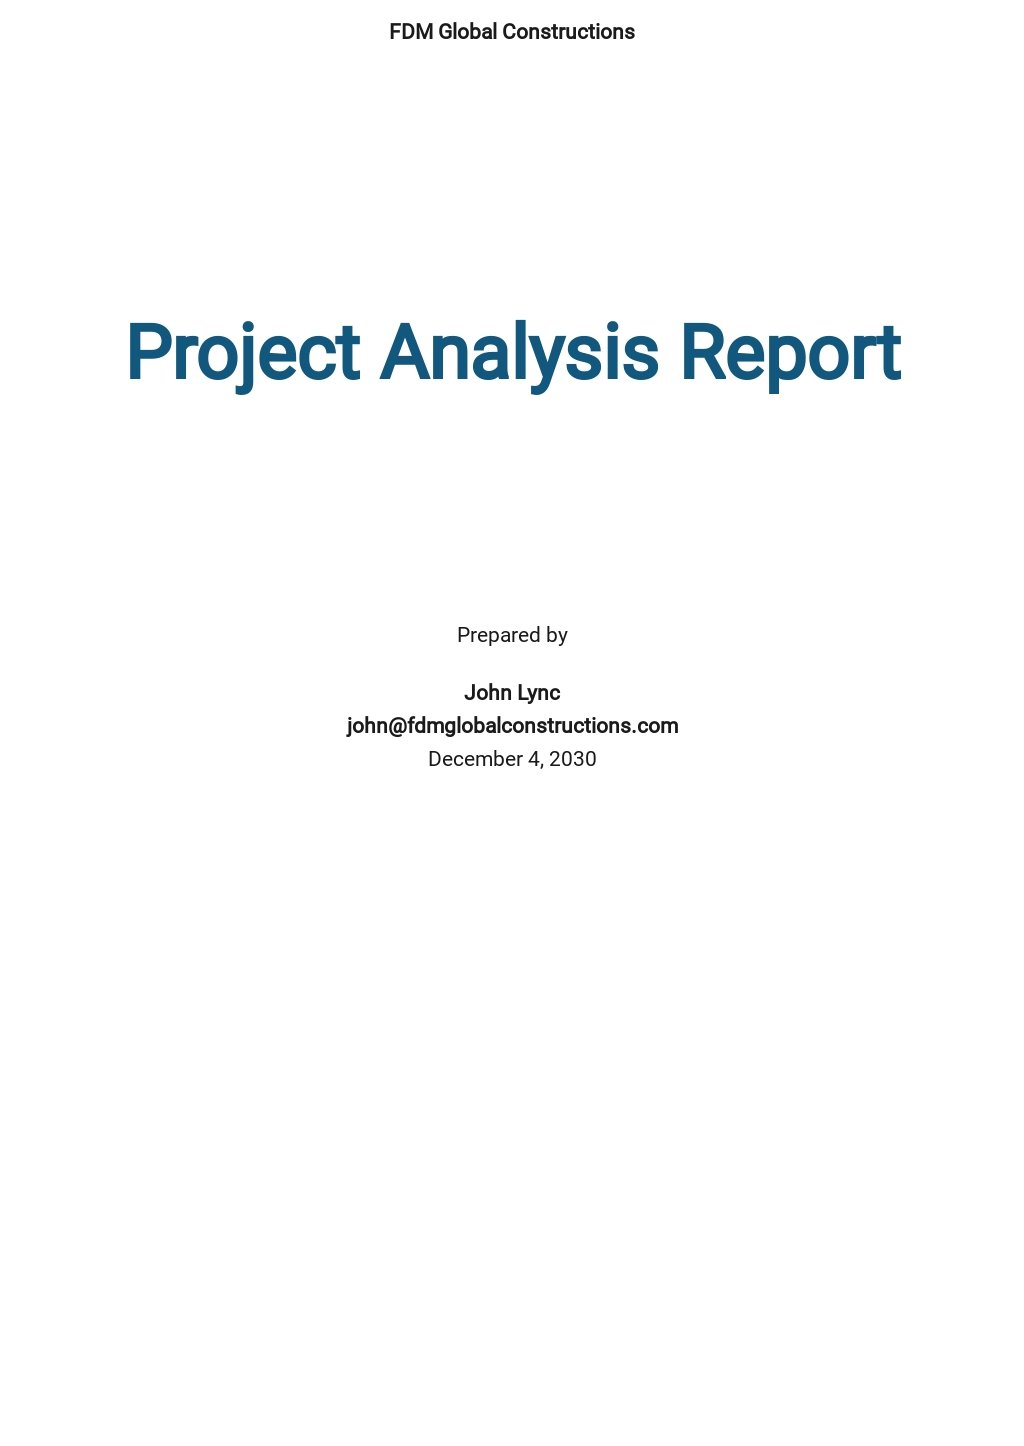 Project Analysis Report Template.jpe